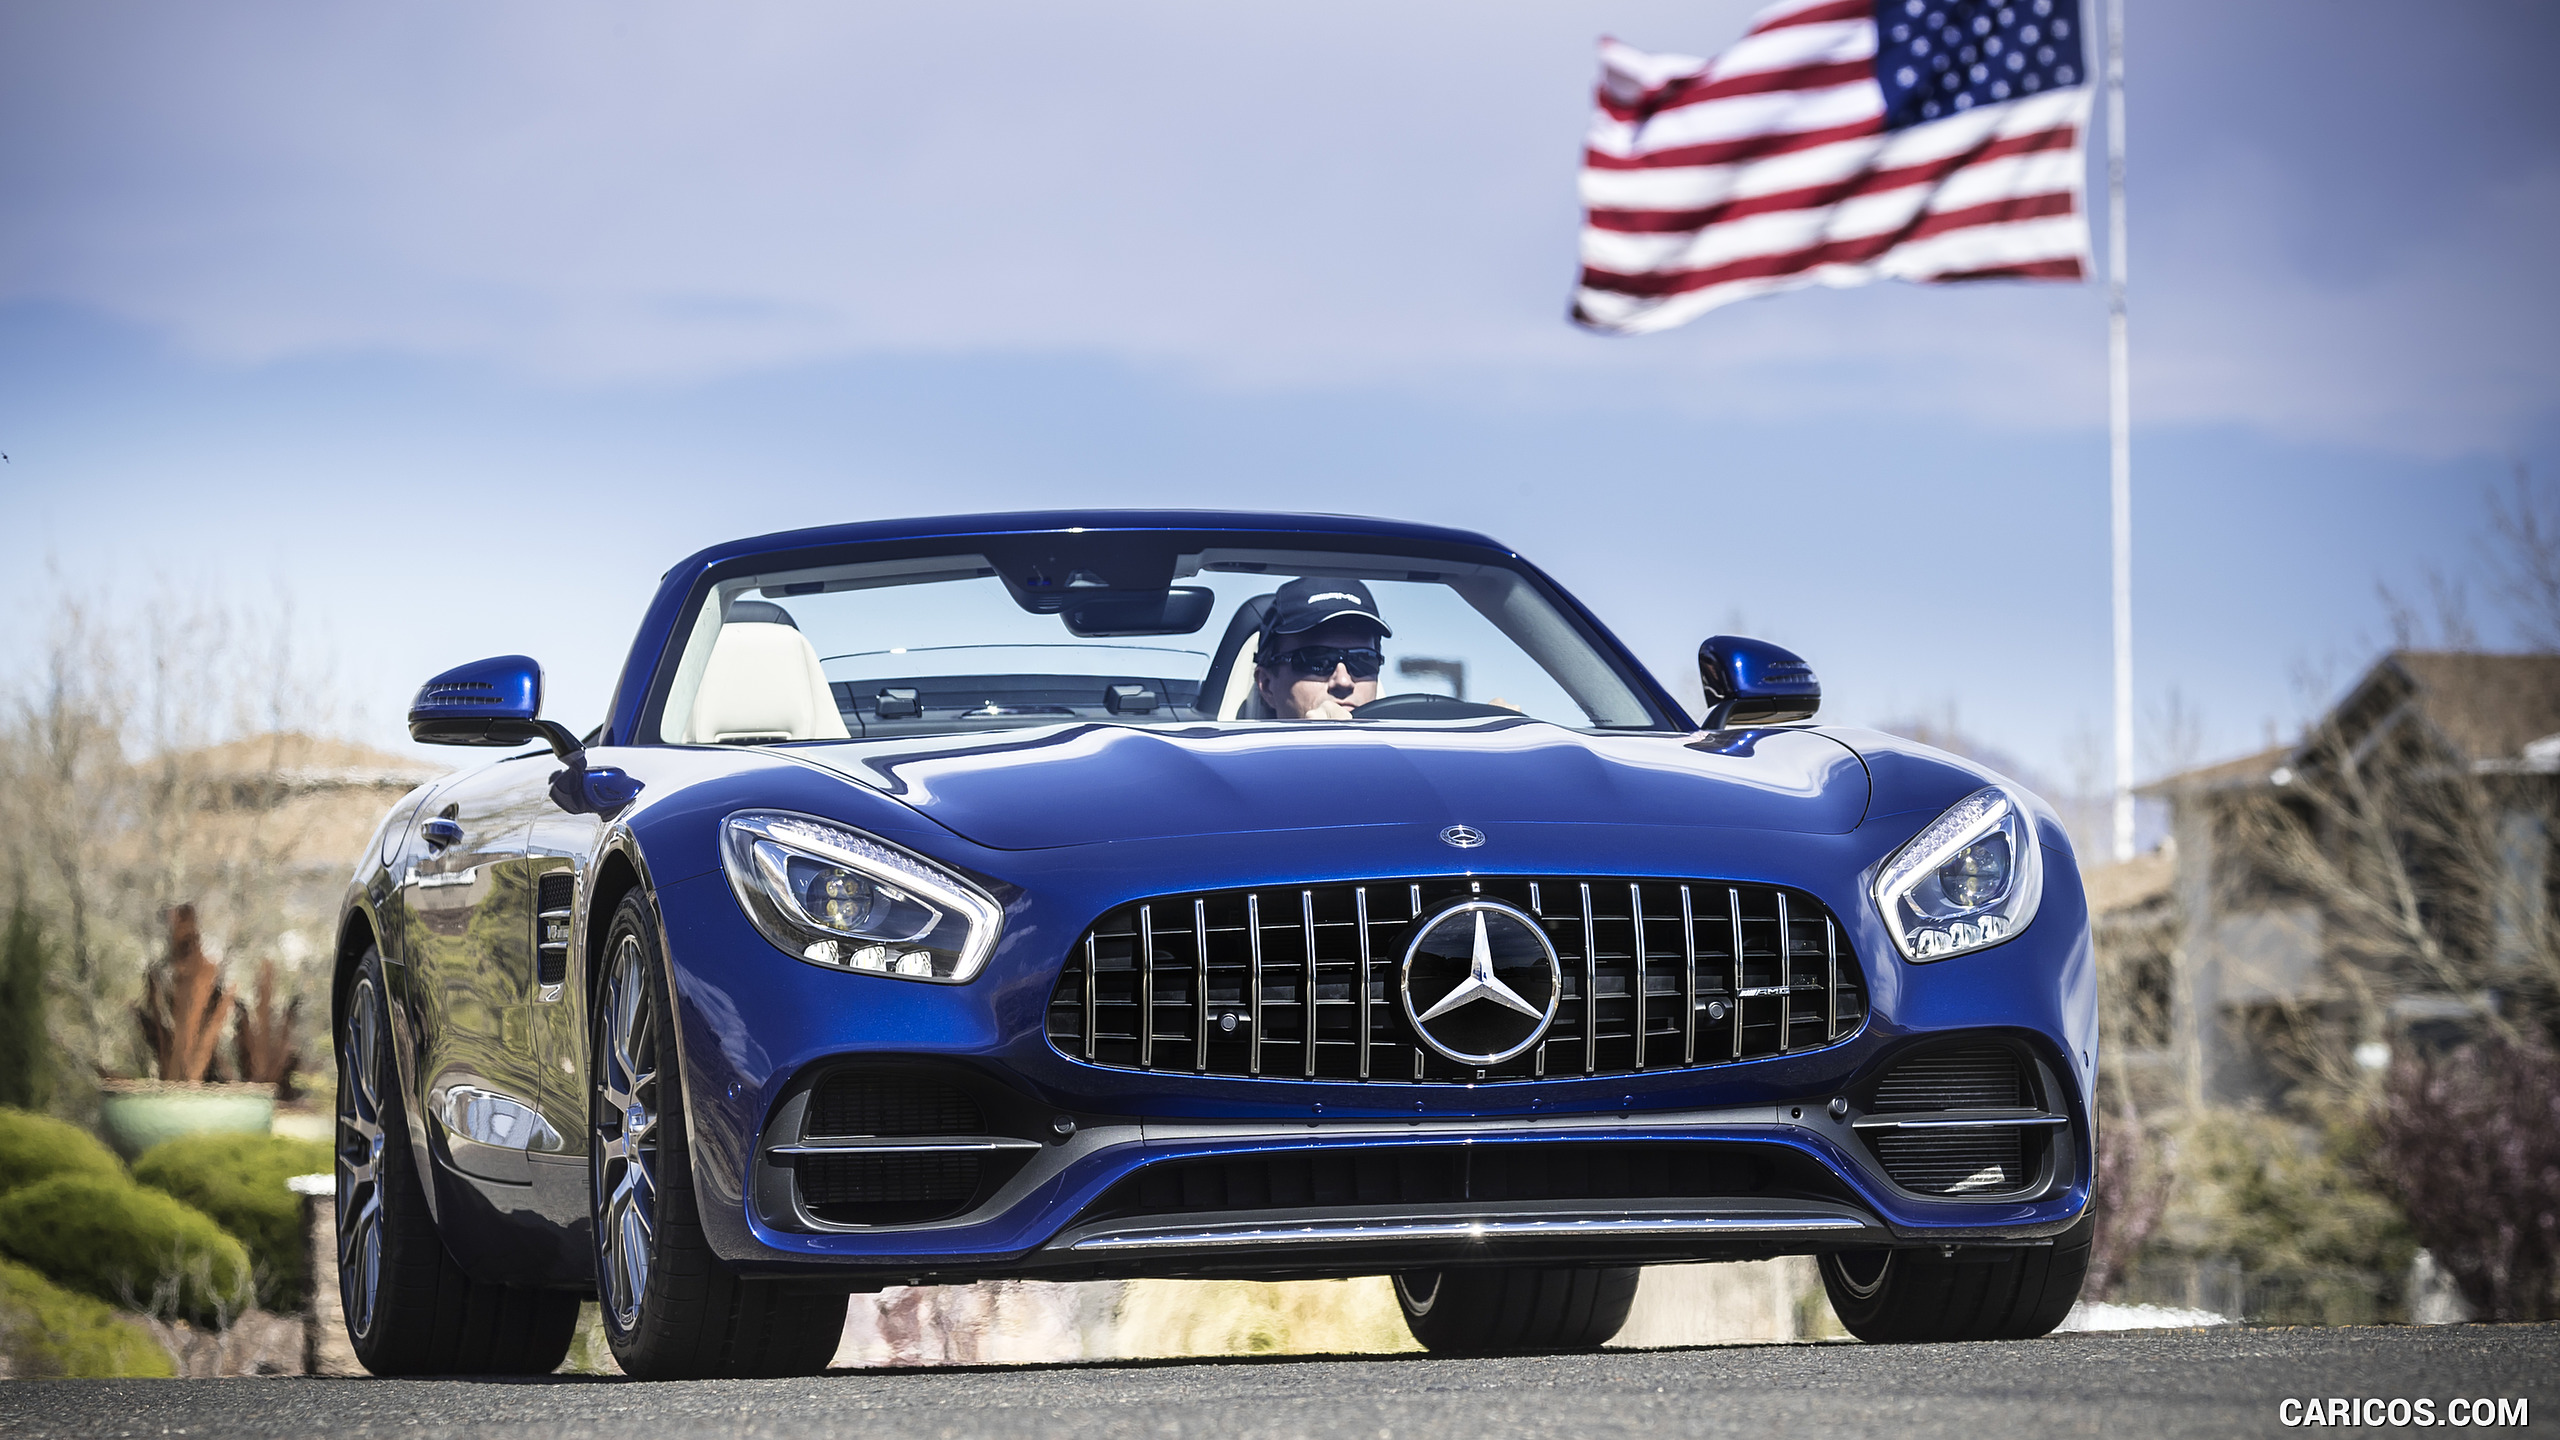 2018 Mercedes-AMG GT Roadster - Front, #107 of 350